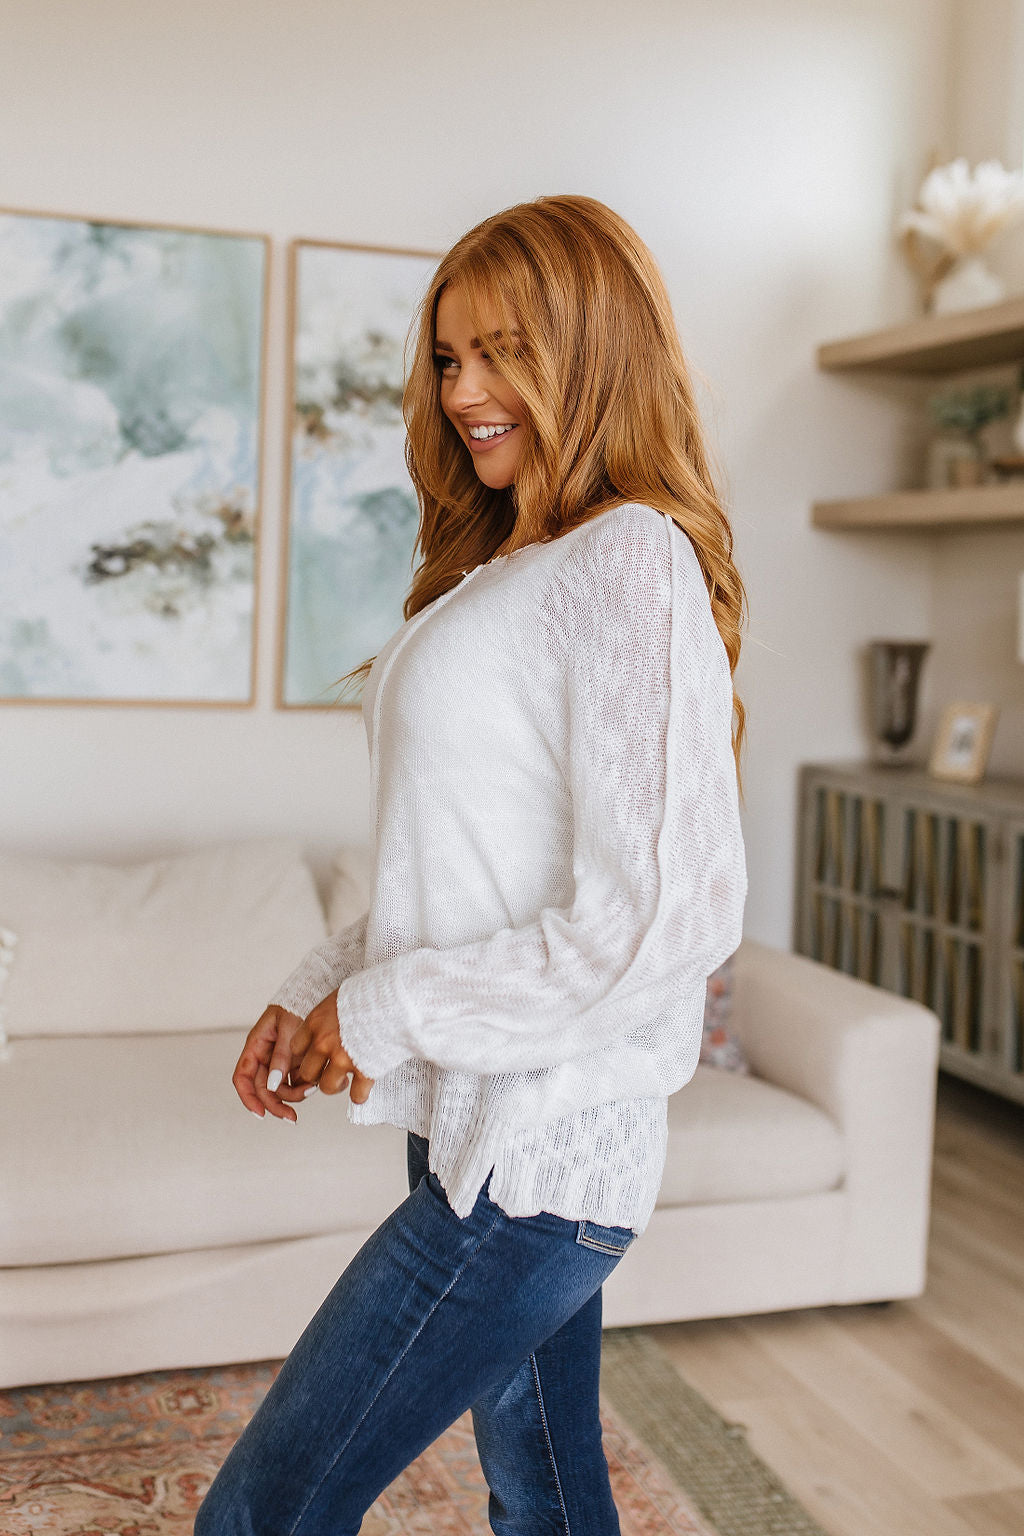 Relax With Me Knit Top in White - WEBSITE EXCLUSIVE